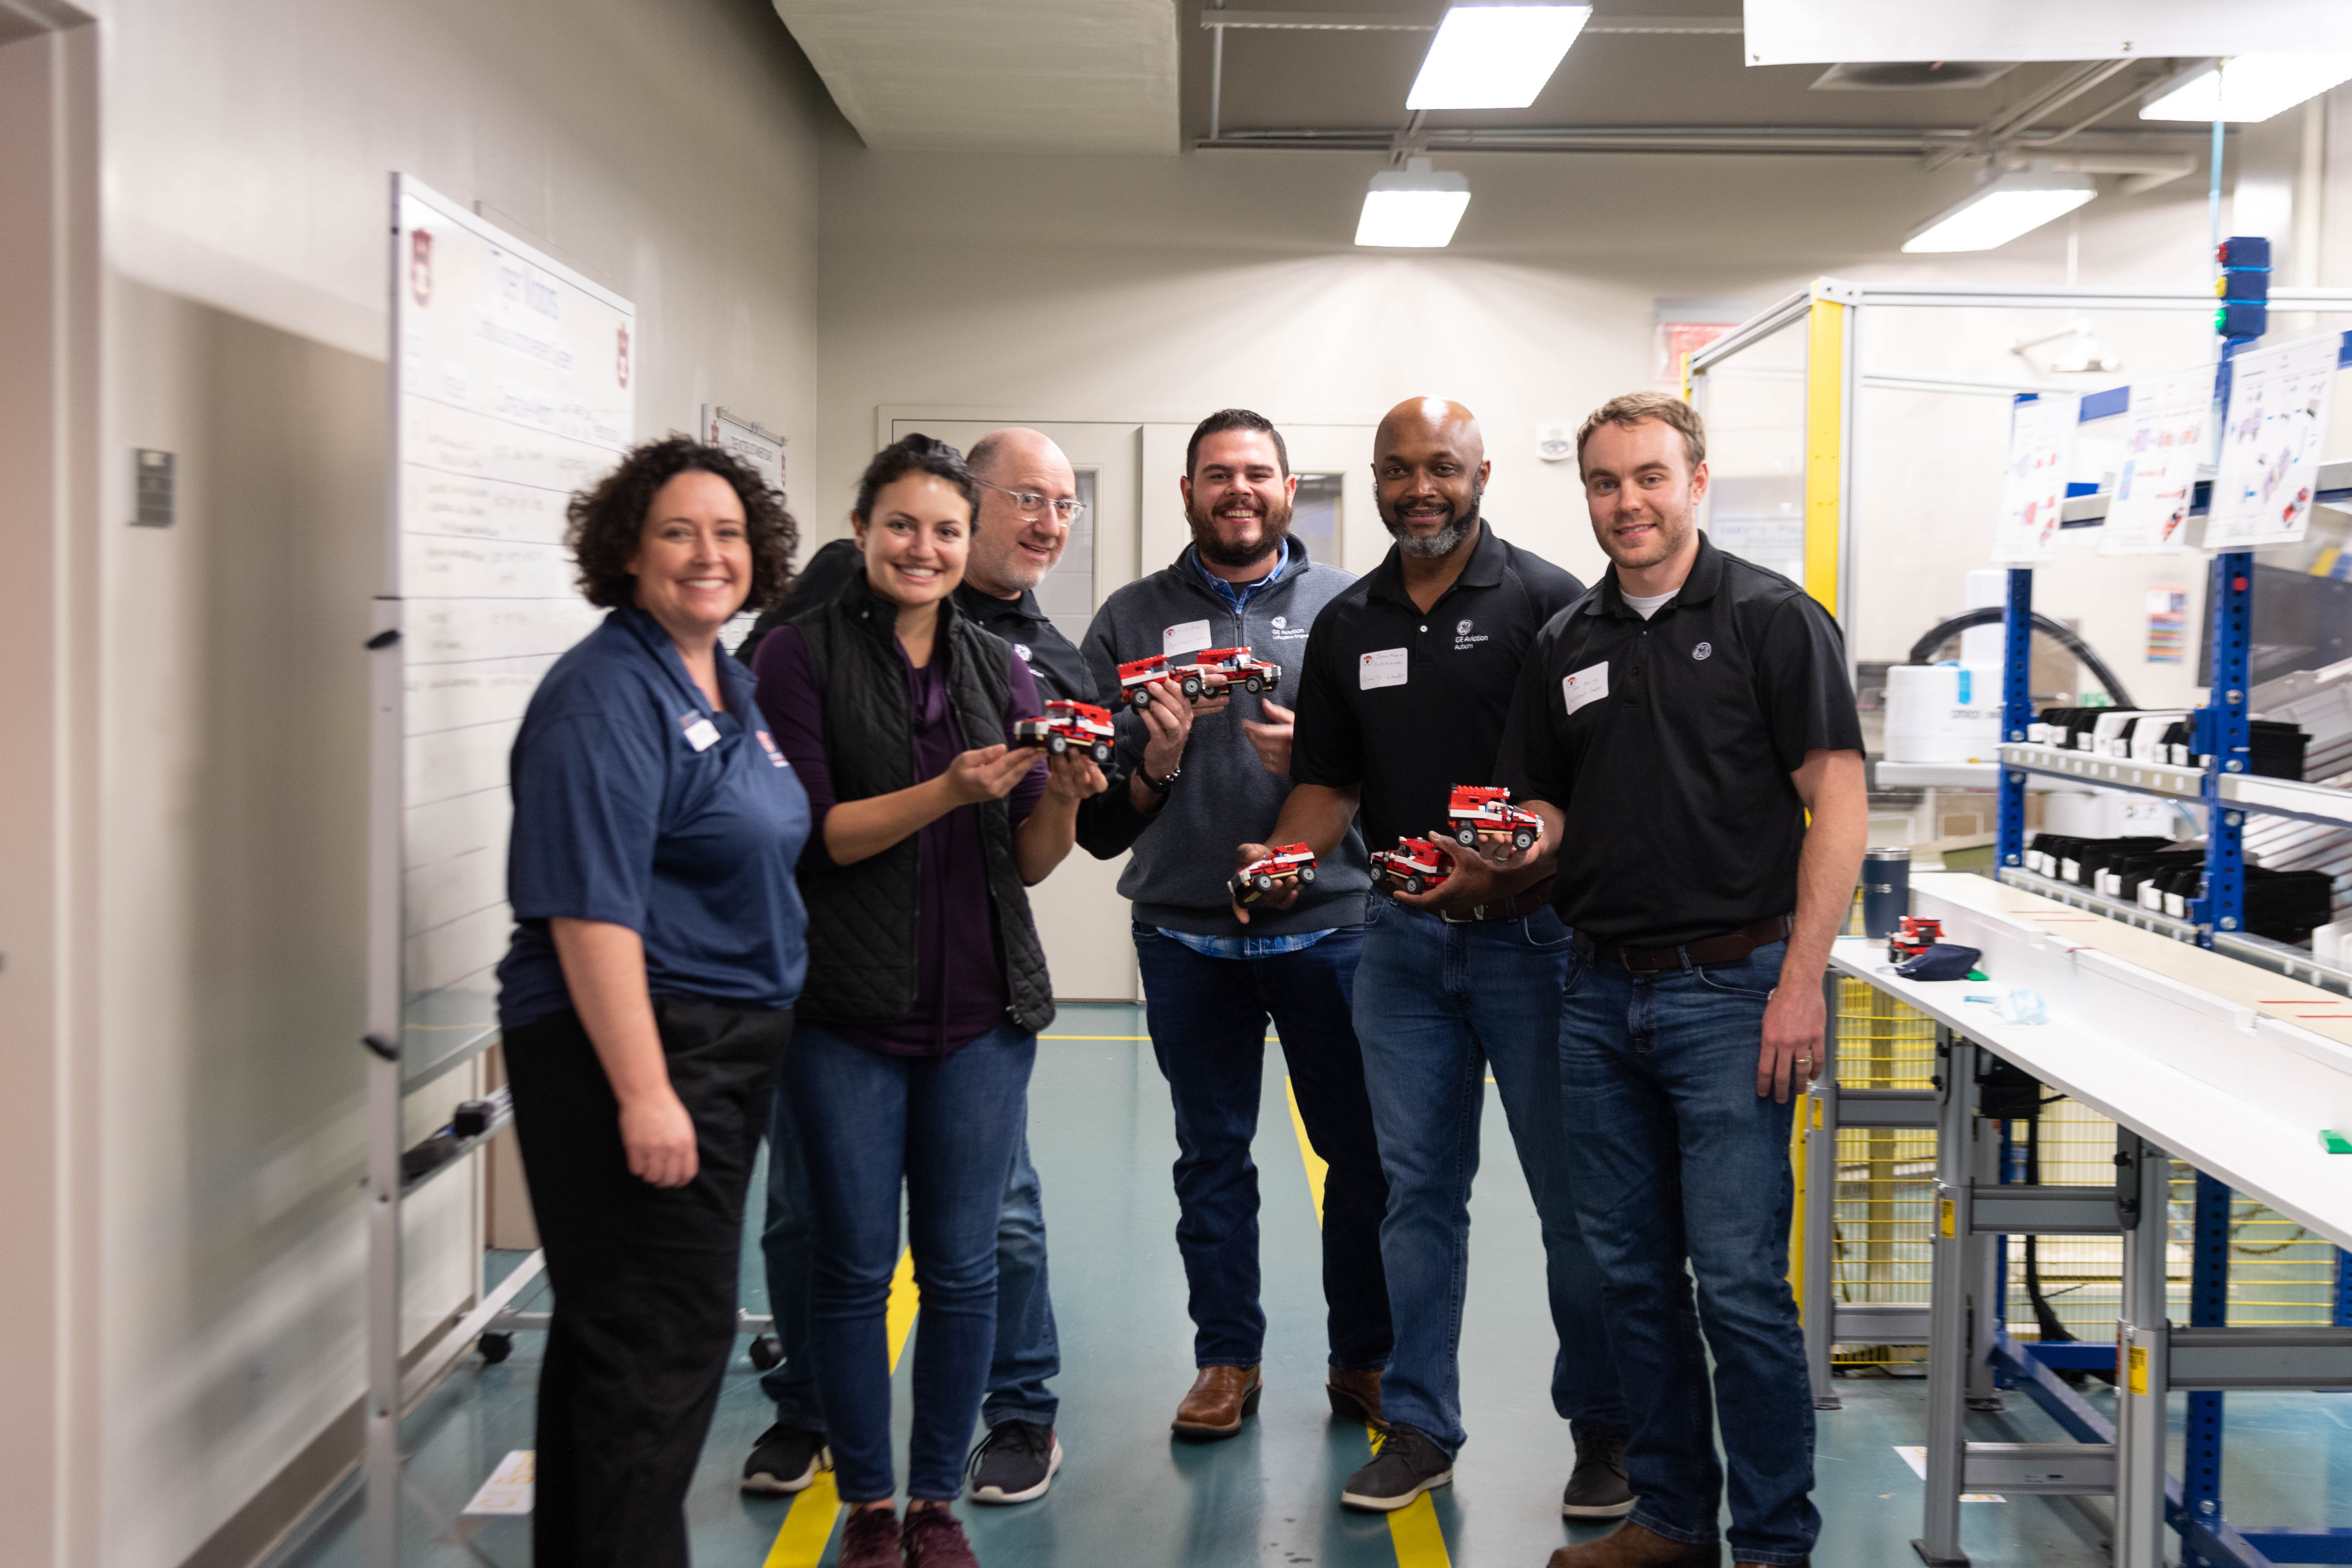 Activities throughout the training included a Current State Value Stream Mapping lecture and activity, a Manufacturing Cells demonstration, a Jidoka Run and discussion and more.